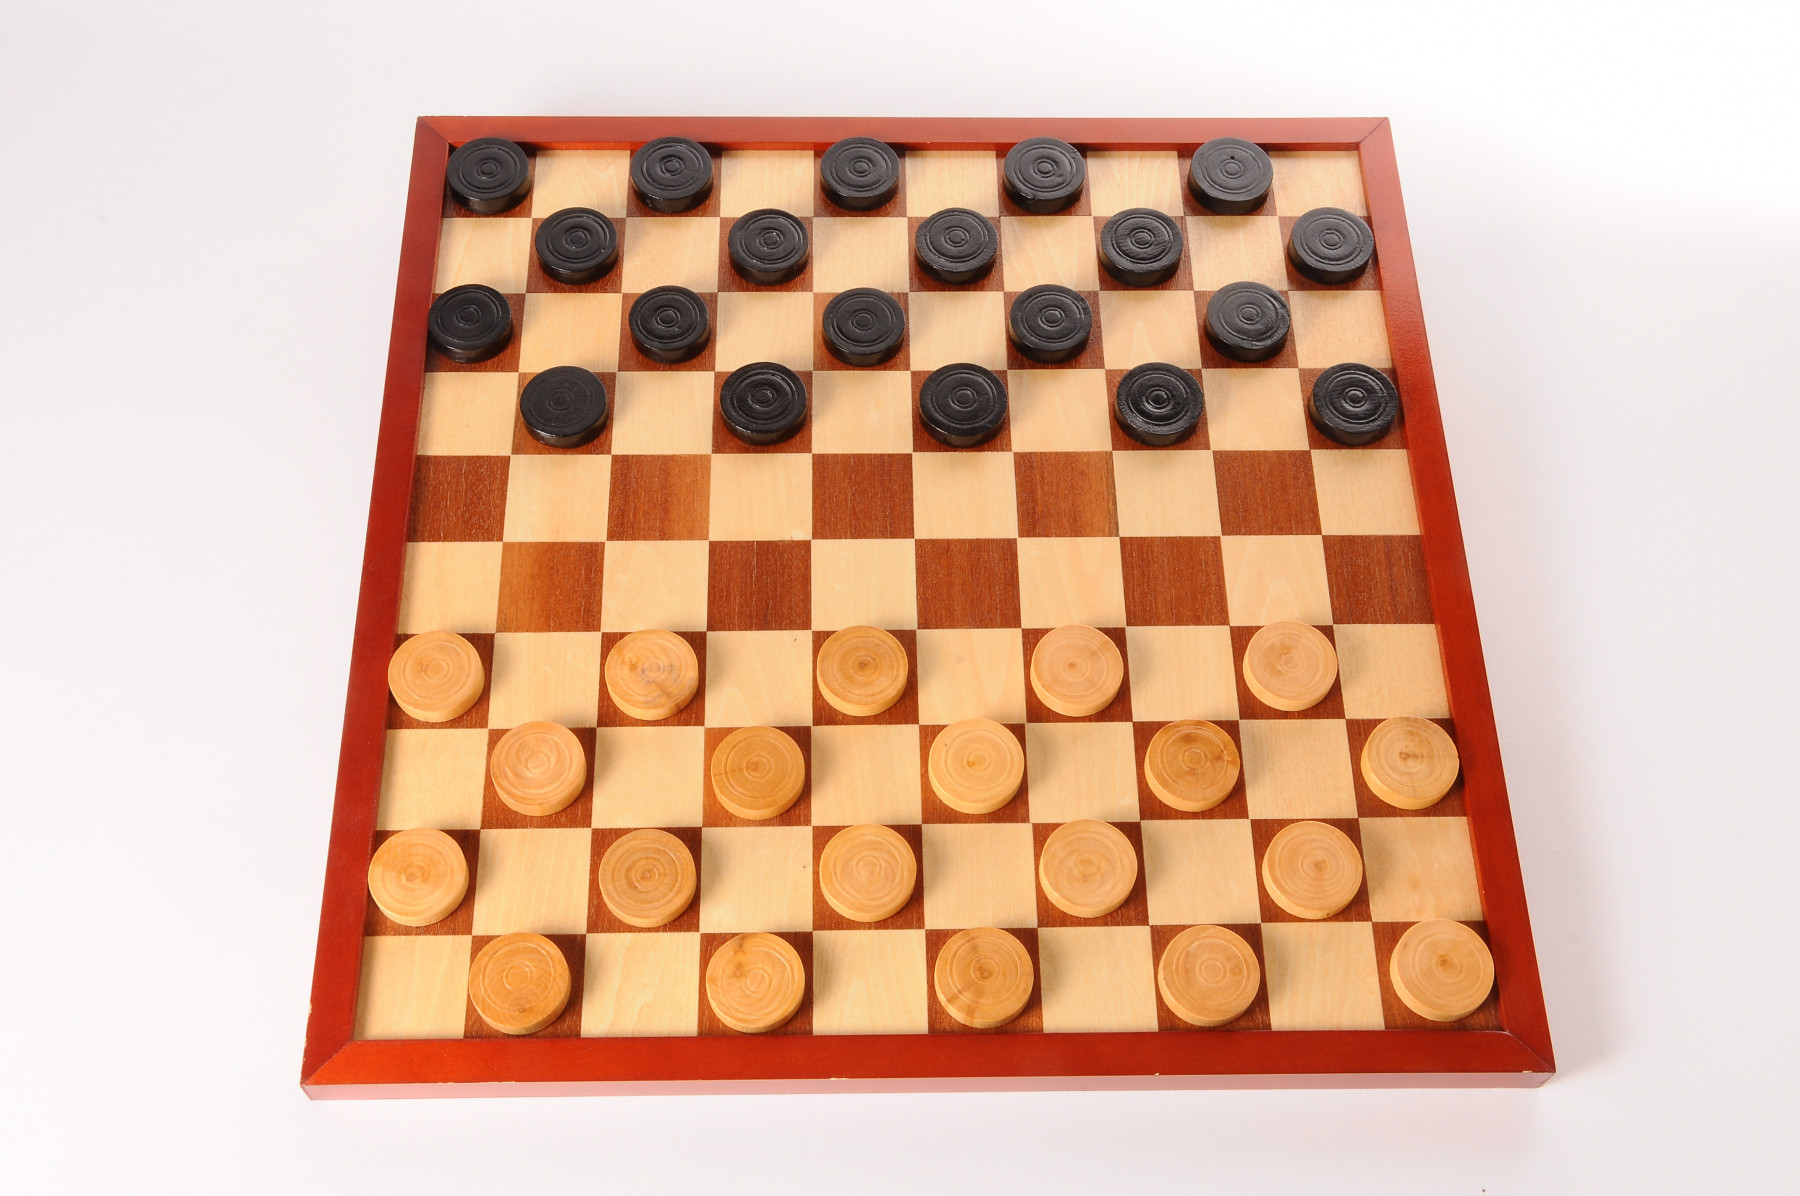 Inlaid 10 x 10 Draughts board / Checkers and 8 x 8 Chess board - Chess ...